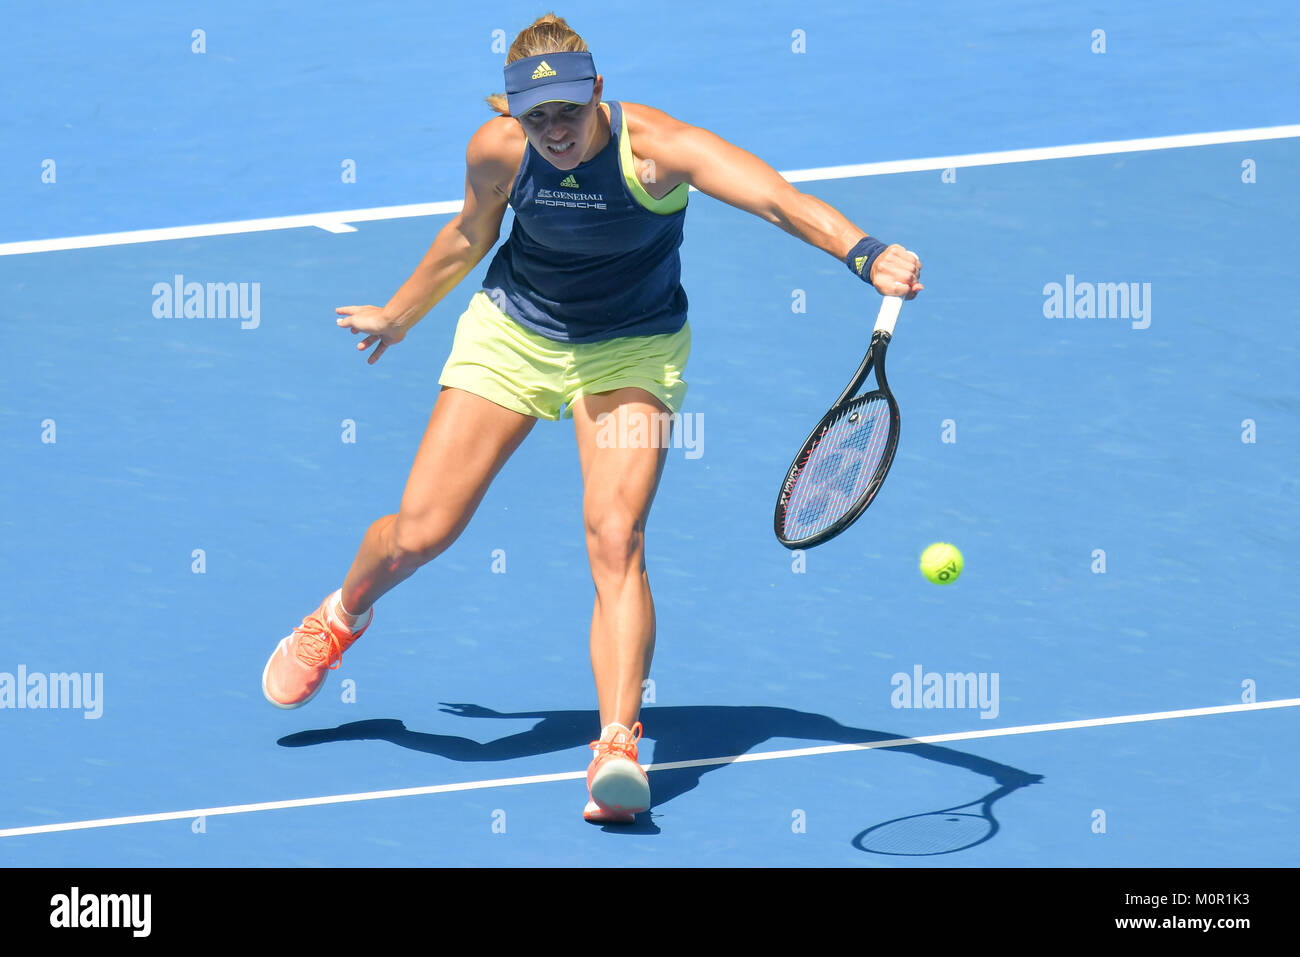 Melbourne, Australia. 23rd Jan, 2018. Twenty-first seed Angelique Kerber of Germany in action in a Quarterfinals match against seventeenth seed Madison Keys of the United States on day ten of the 2018 Australian Open Grand Slam tennis tournament in Melbourne, Australia. Kerber won 61 62. Sydney Low/Cal Sport Media/Alamy Live News Stock Photo